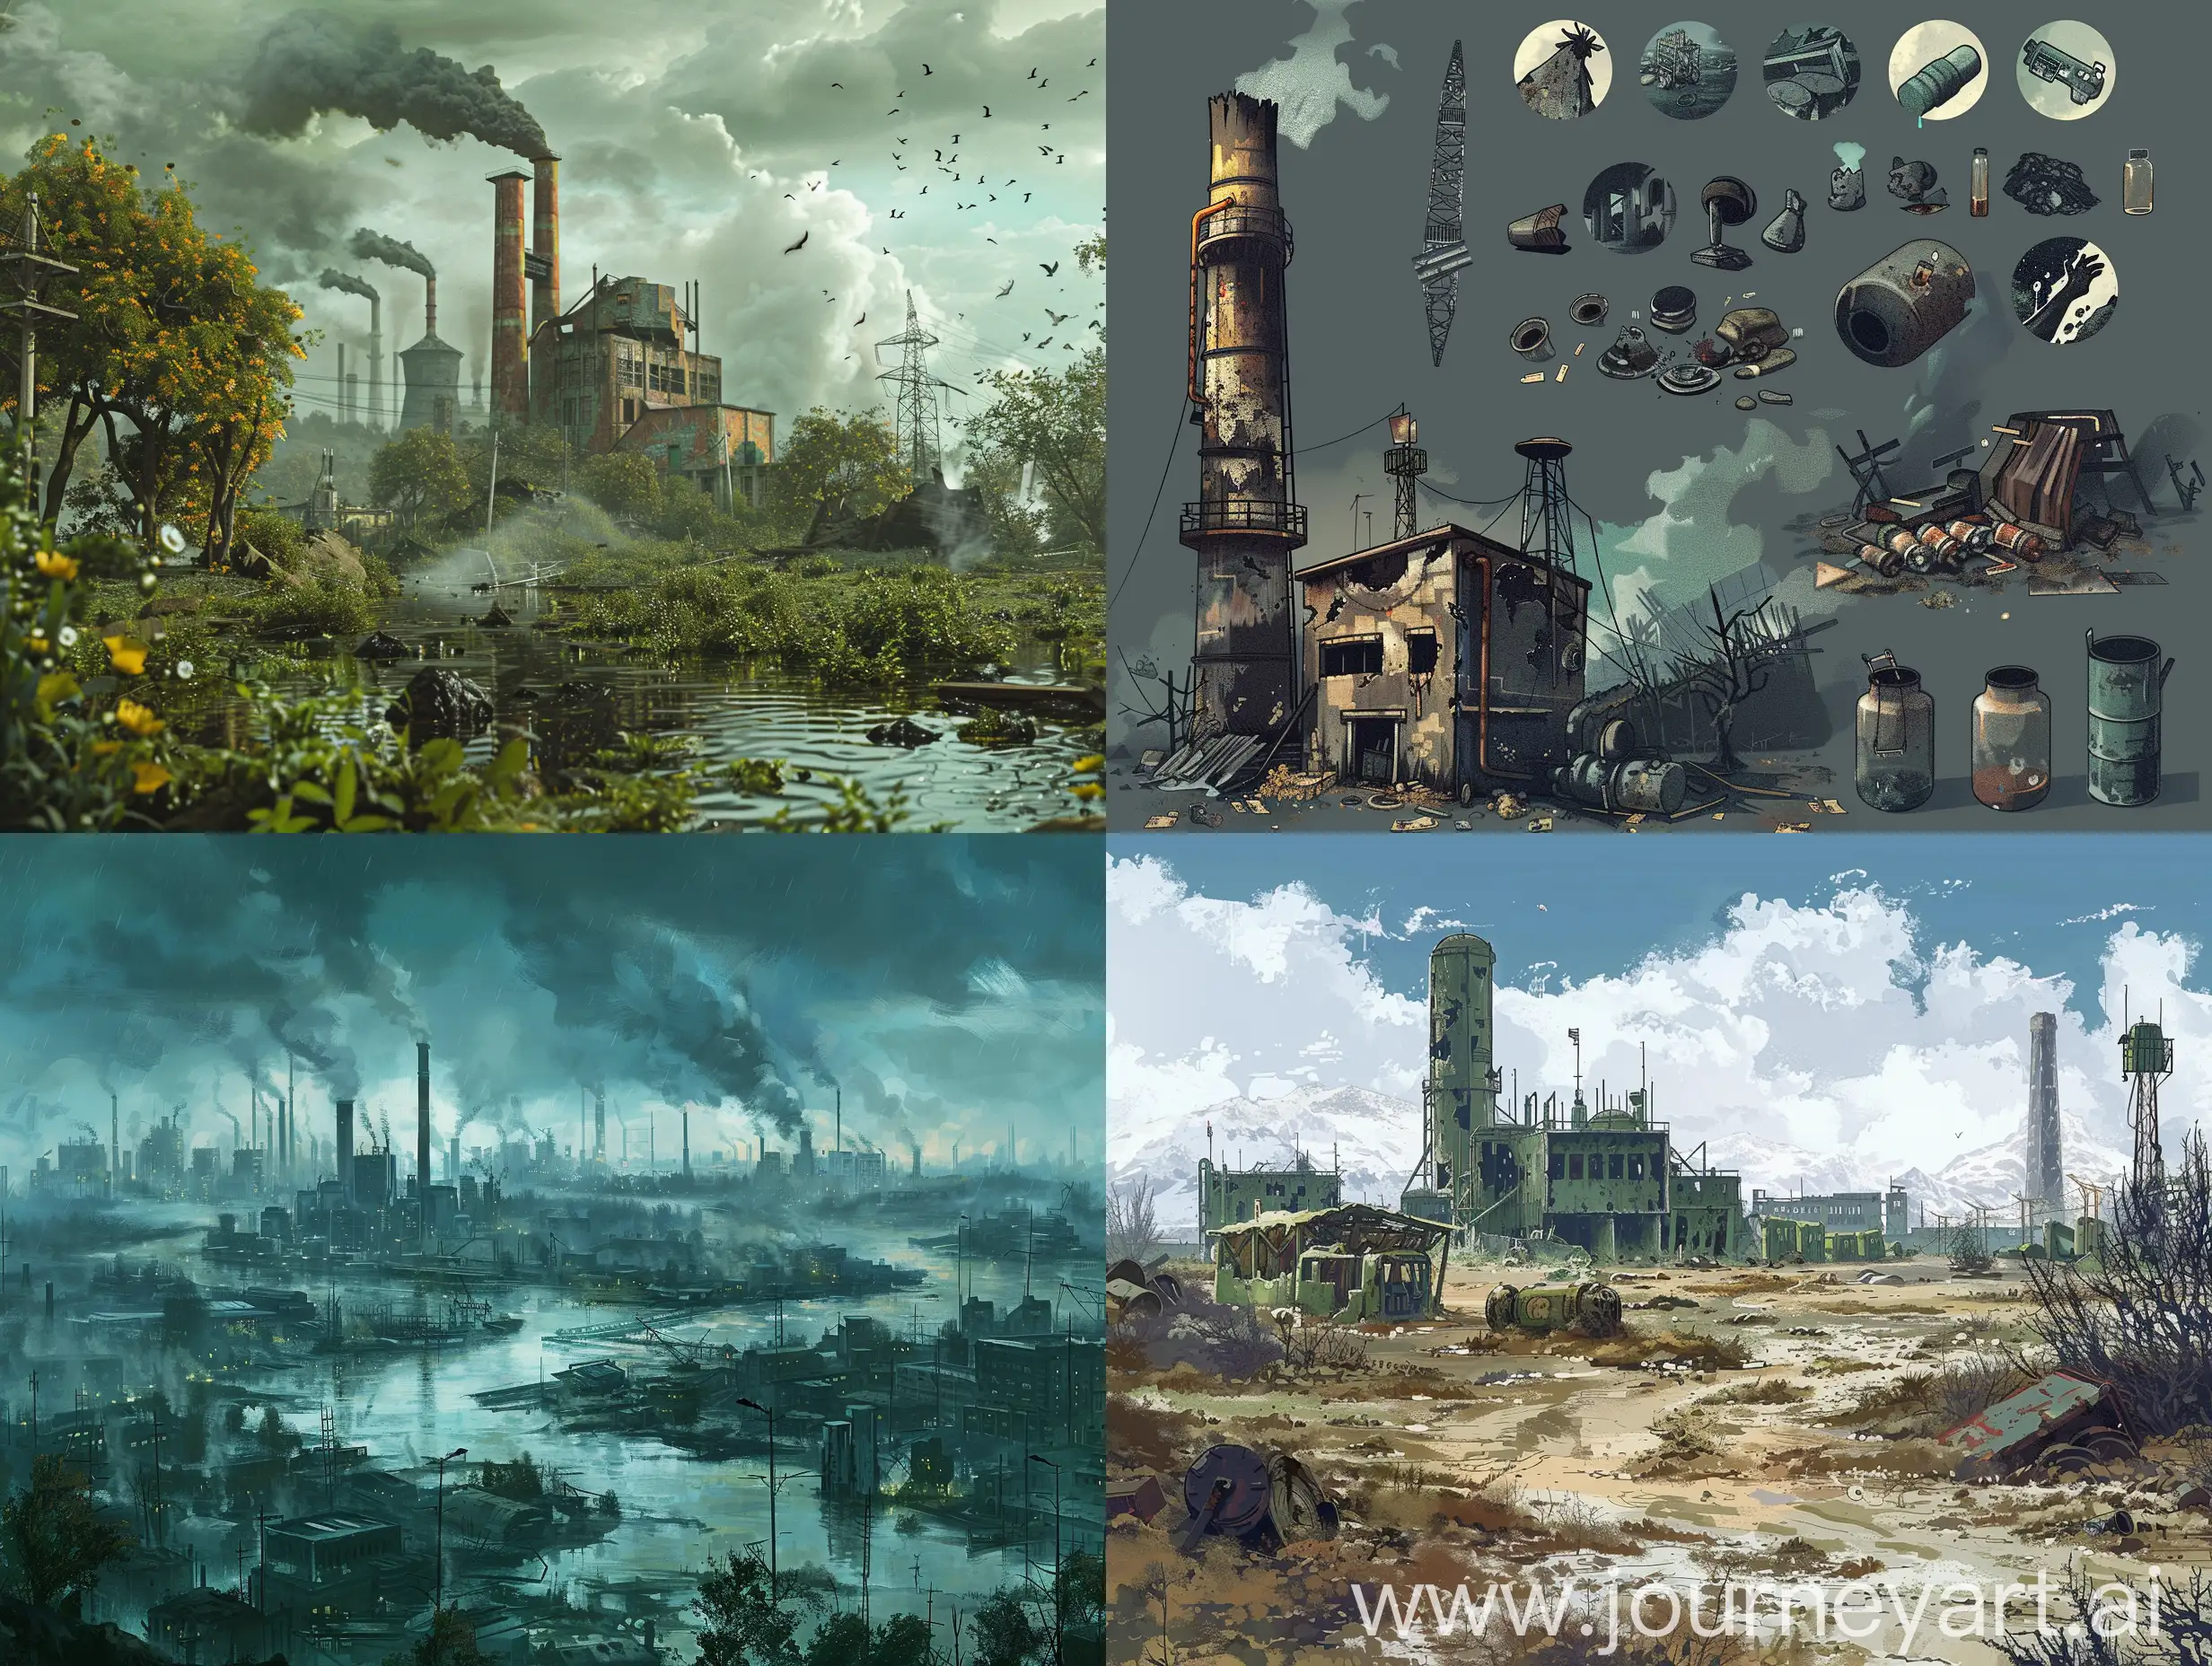 PostApocalyptic-Survival-Game-Interface-Environmental-Pollution-and-Depleted-Resources